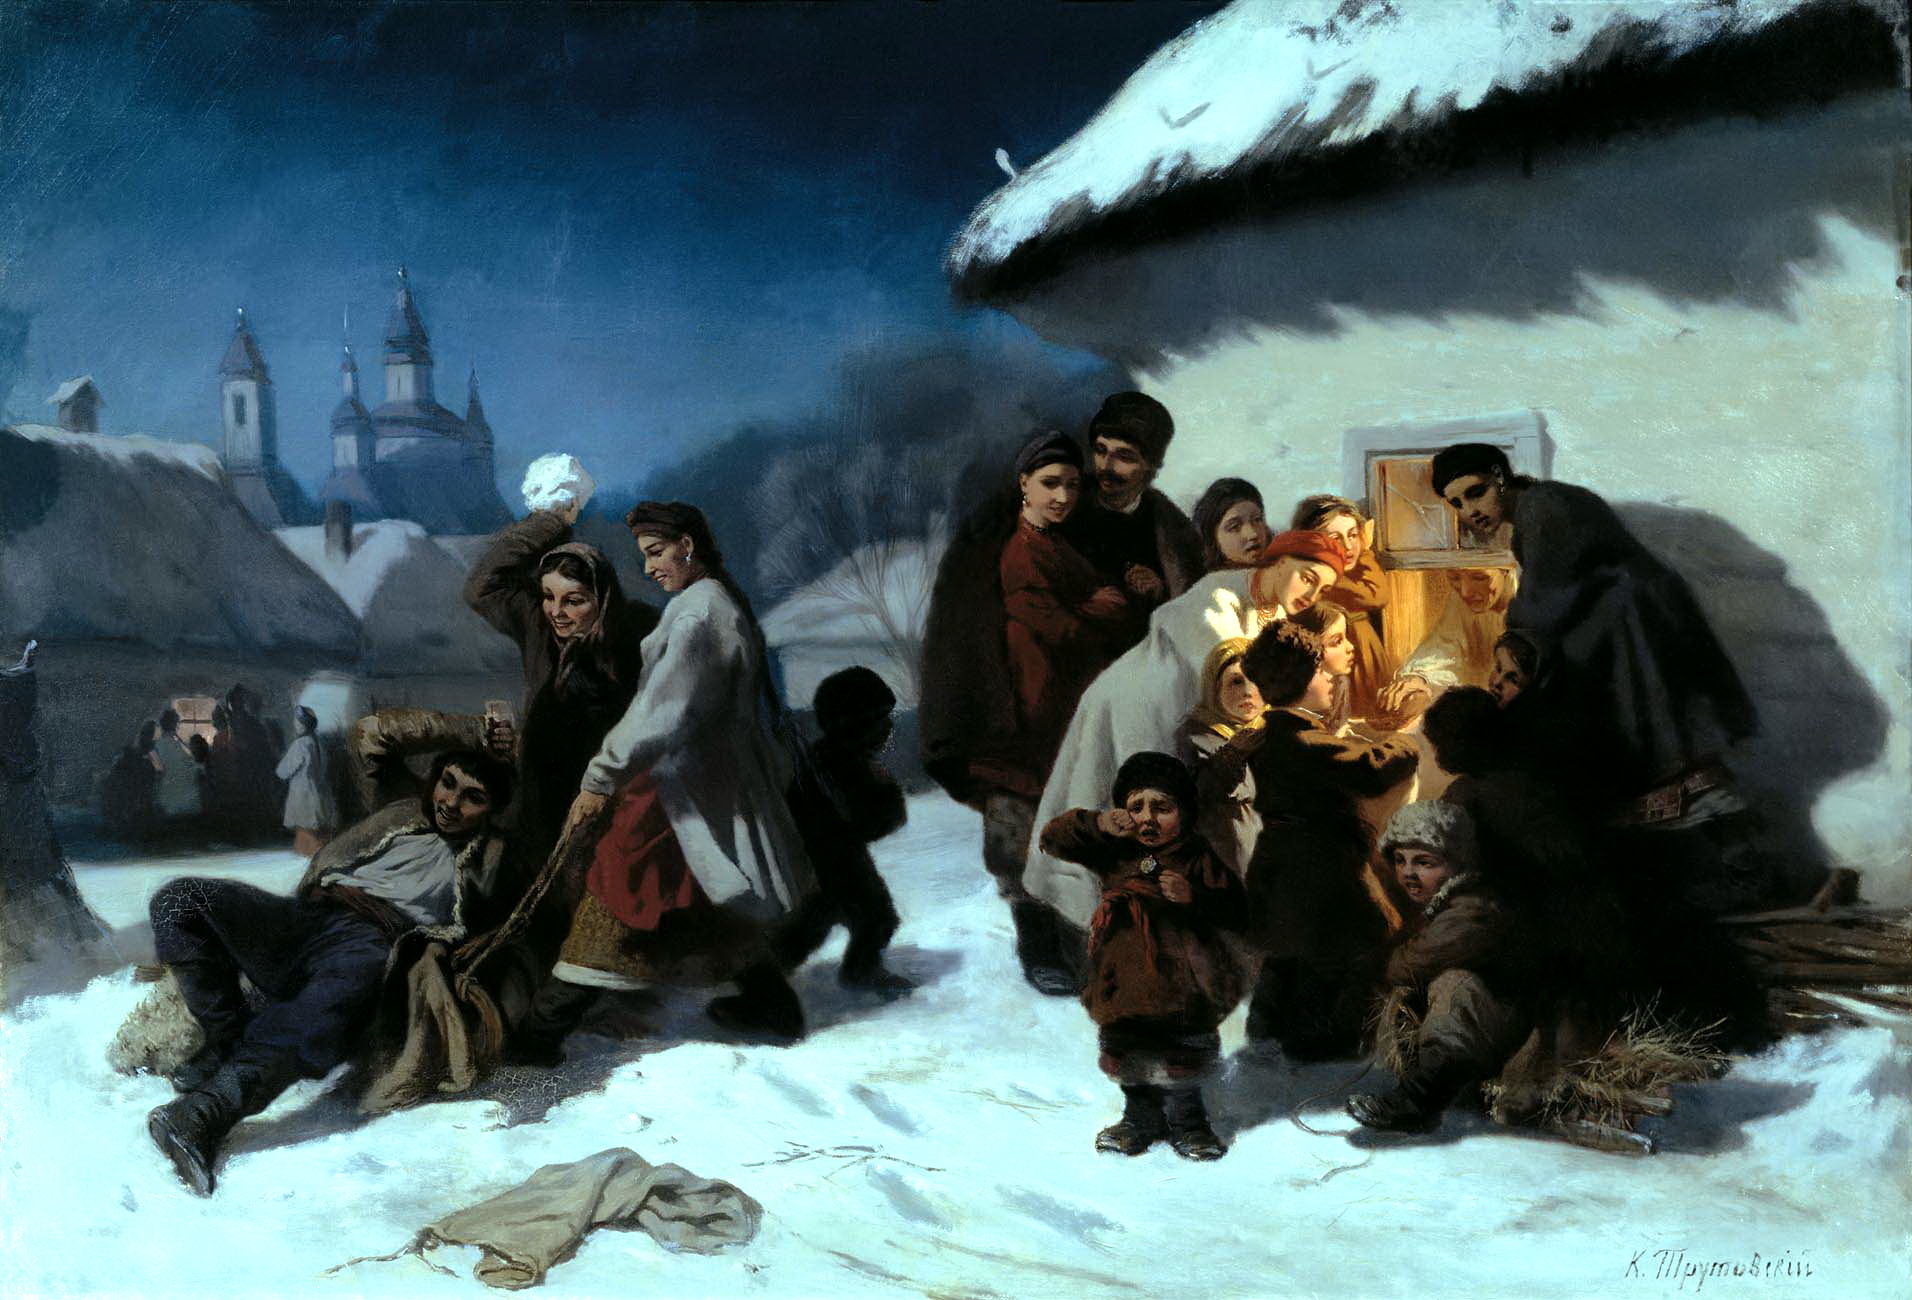 Christmas traditions in Ukraine